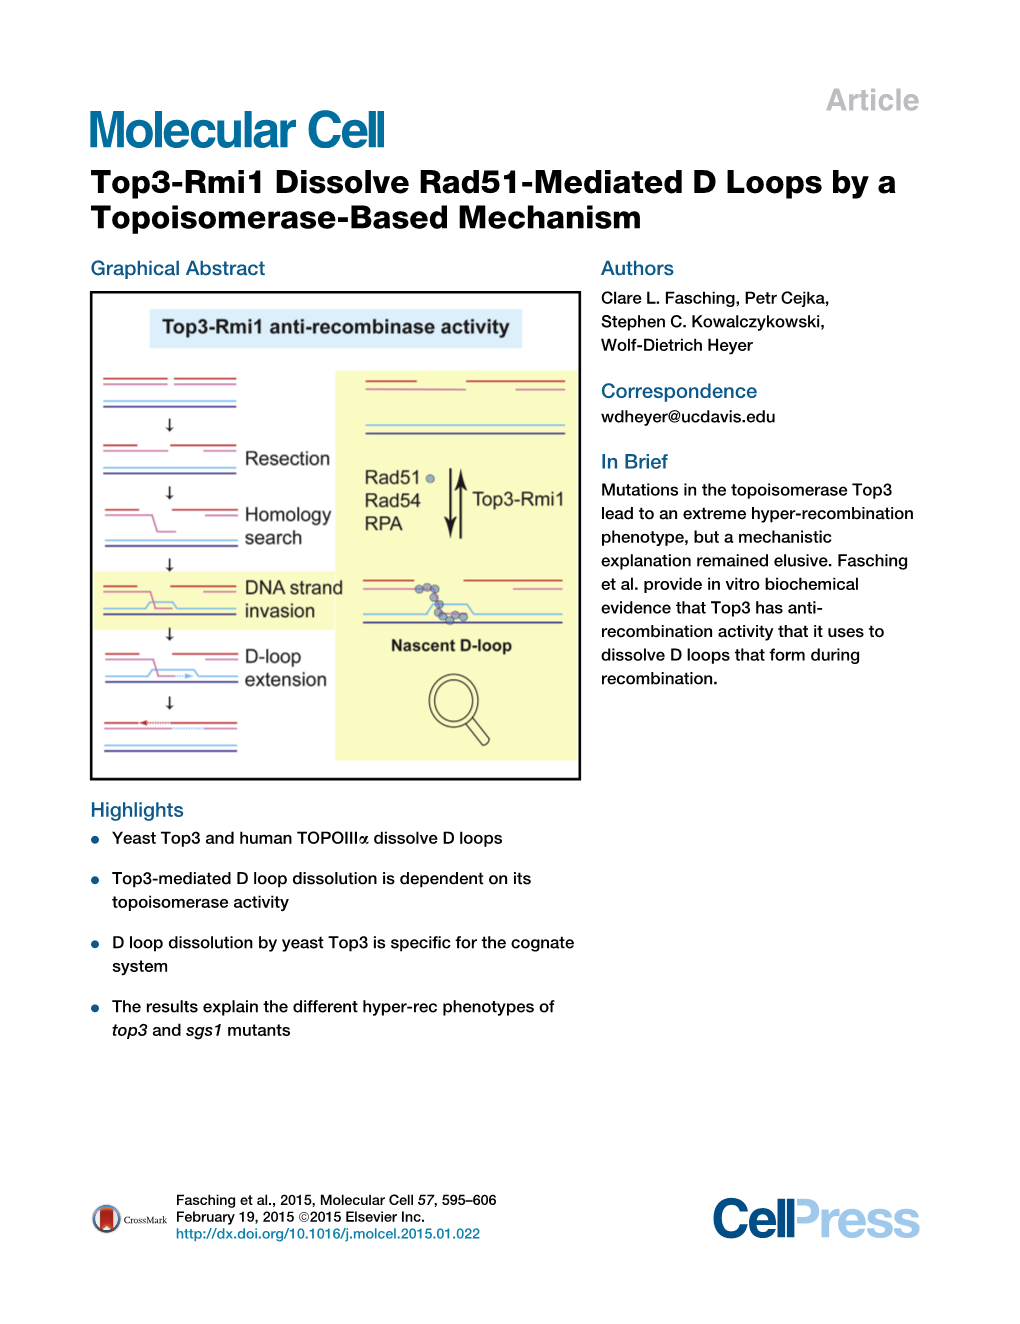 Top3-Rmi1 Dissolve Rad51-Mediated D Loops by a Topoisomerase-Based Mechanism